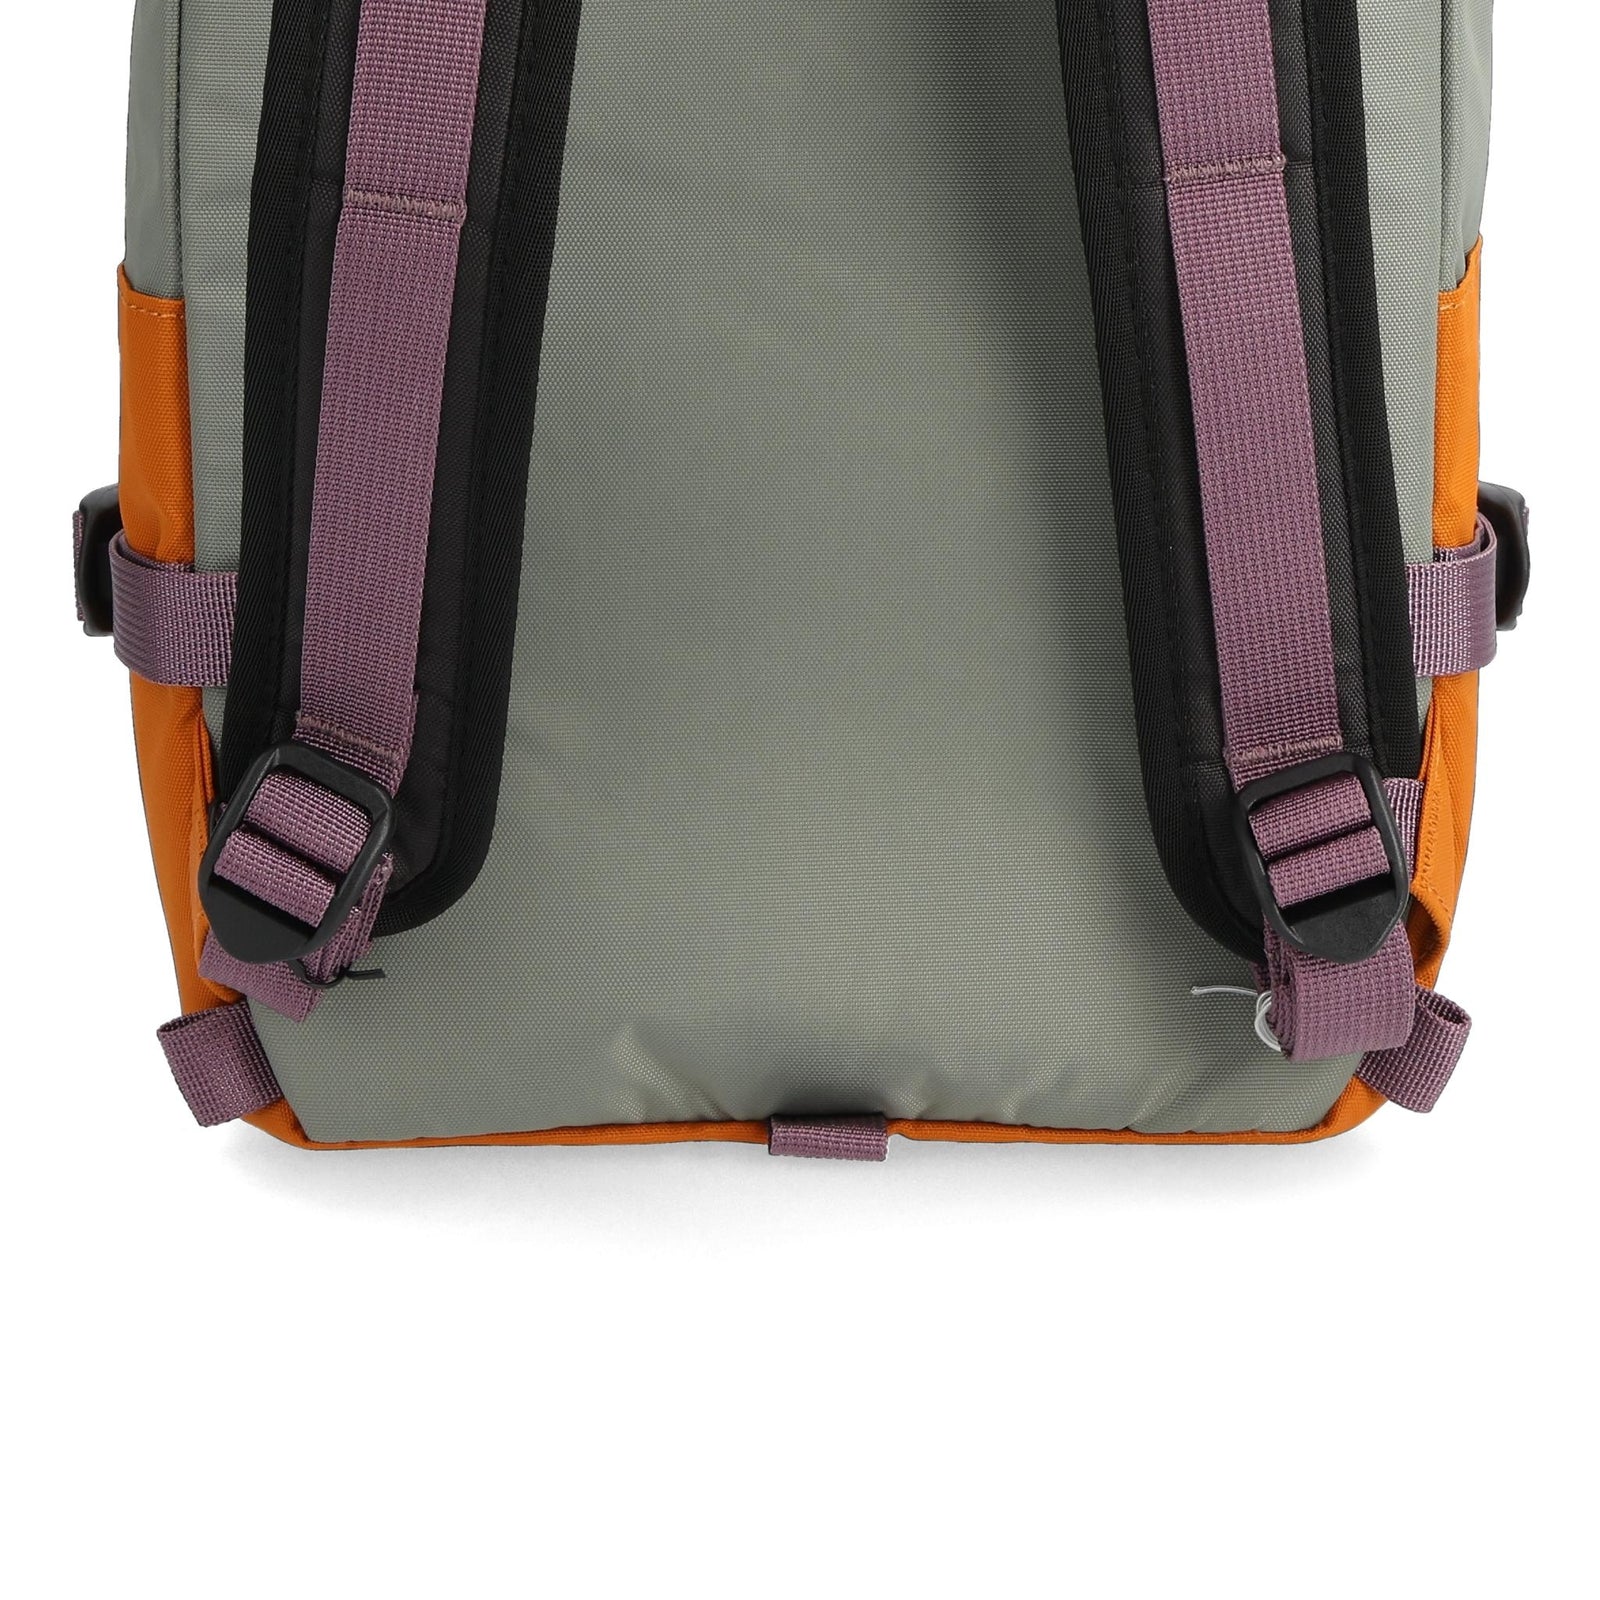 Detail shot of Topo Designs Rover Pack Classic in "Beetle / Spice"